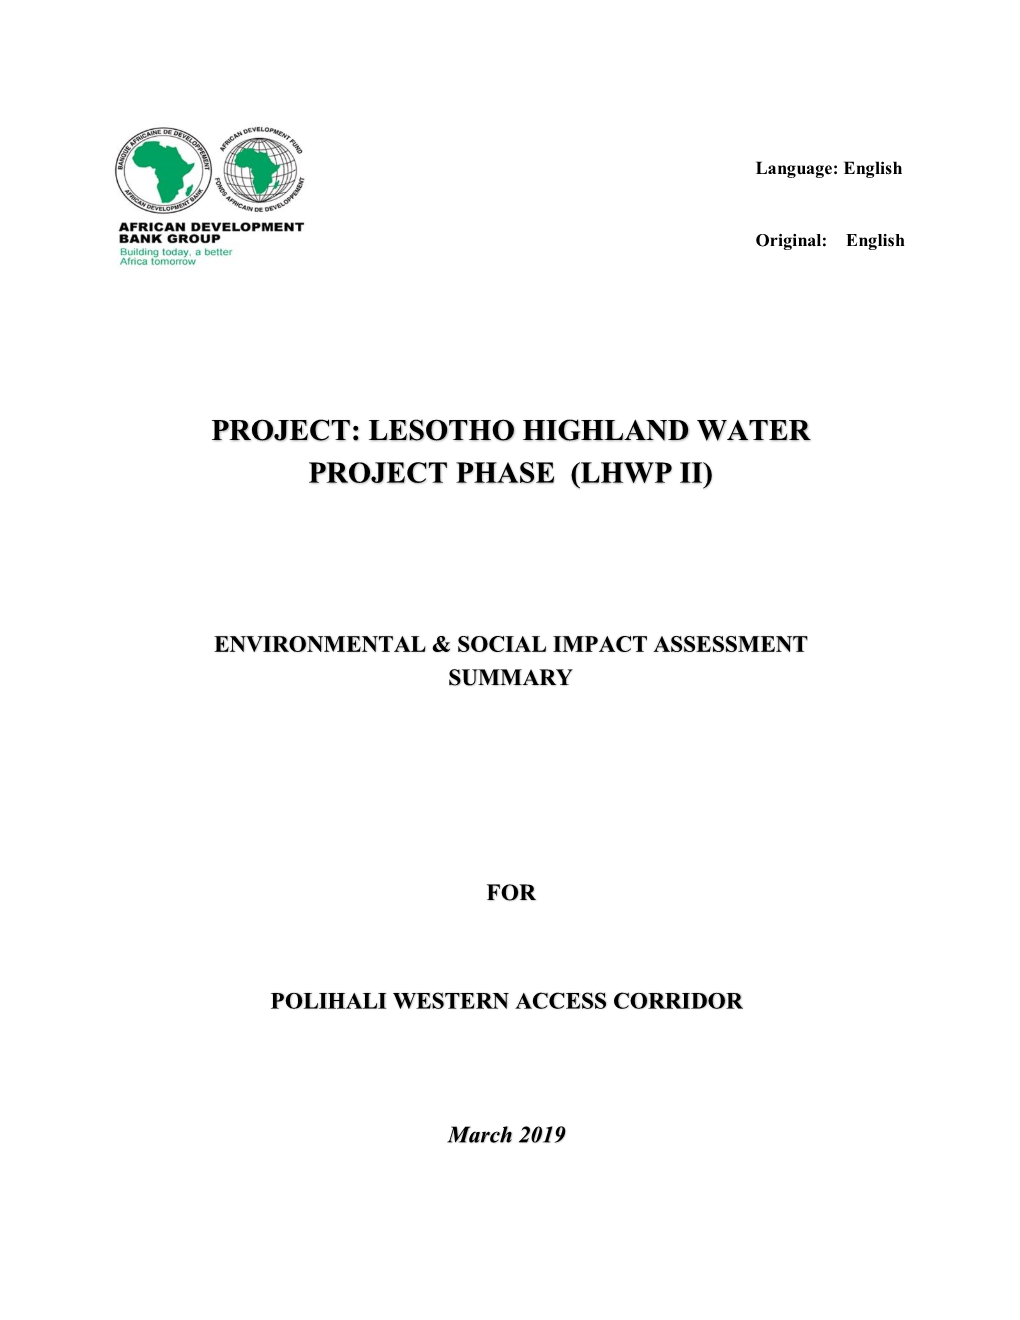 Project: Lesotho Highland Water Project Phase (Lhwp Ii)